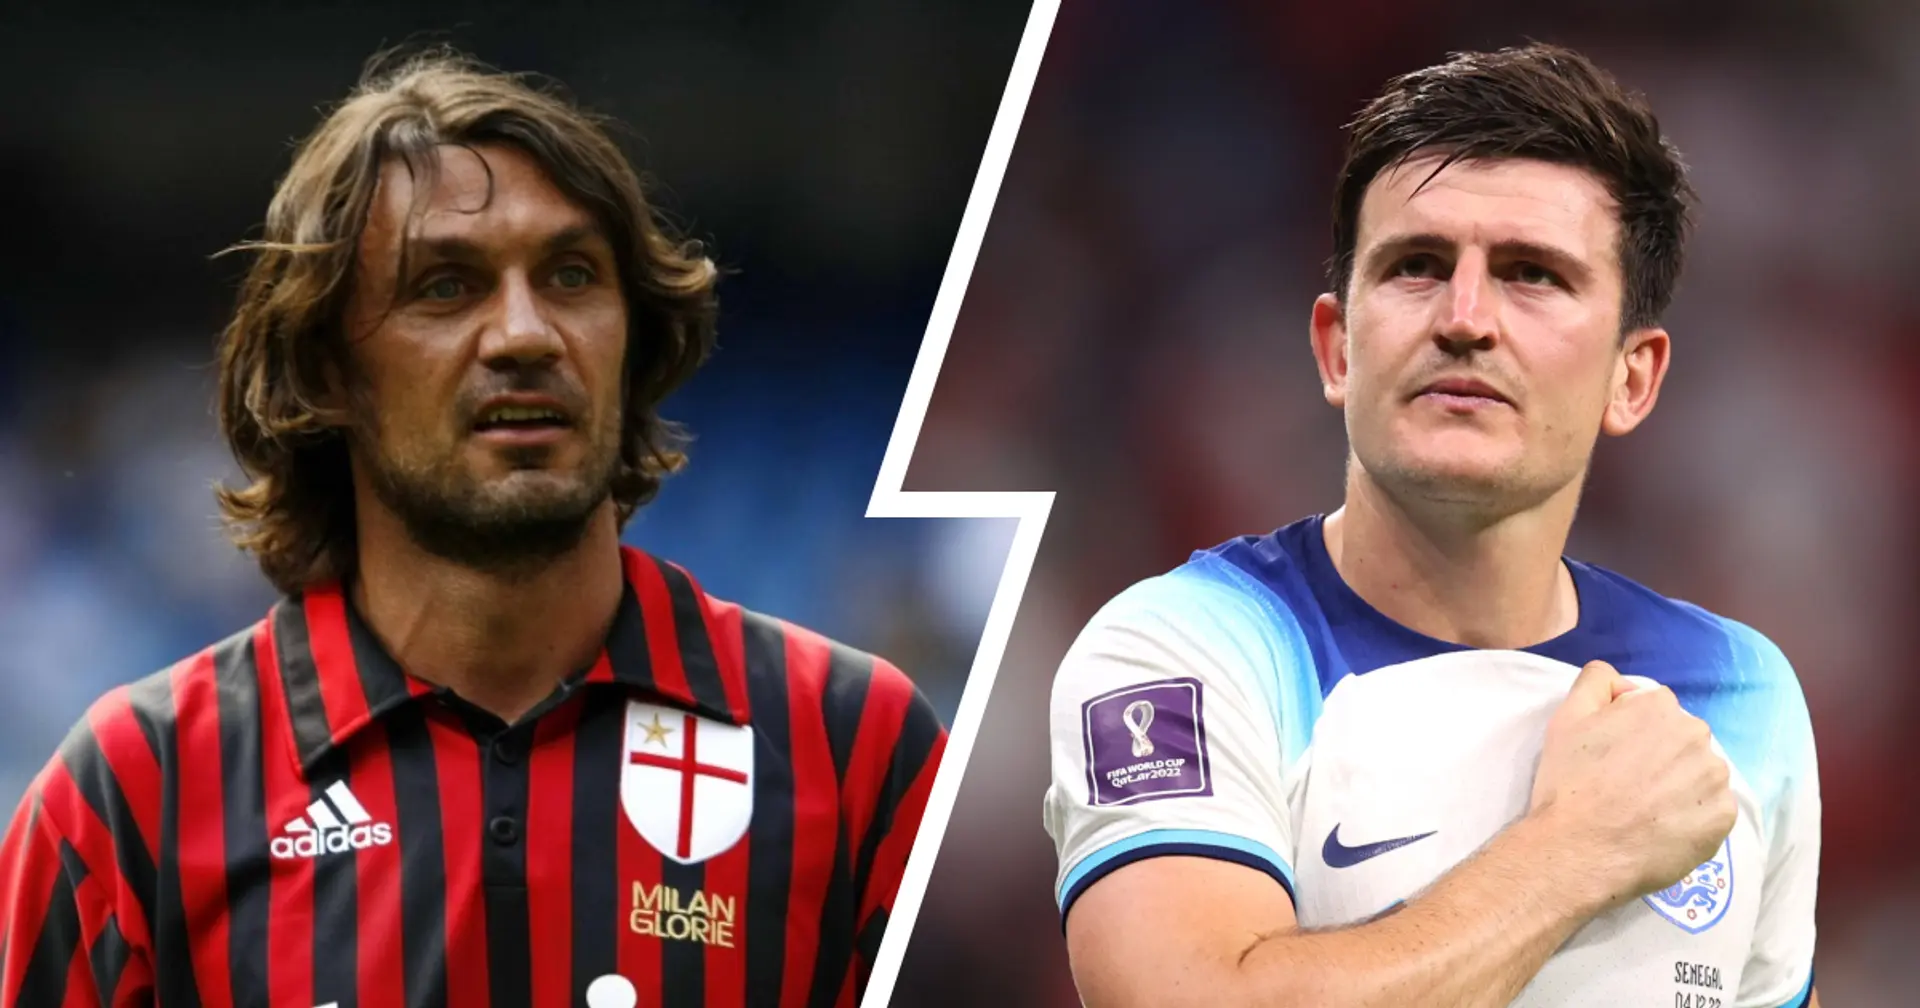 Harry Maguire compared to Paolo Maldini & 3 more big Man United stories you might've missed